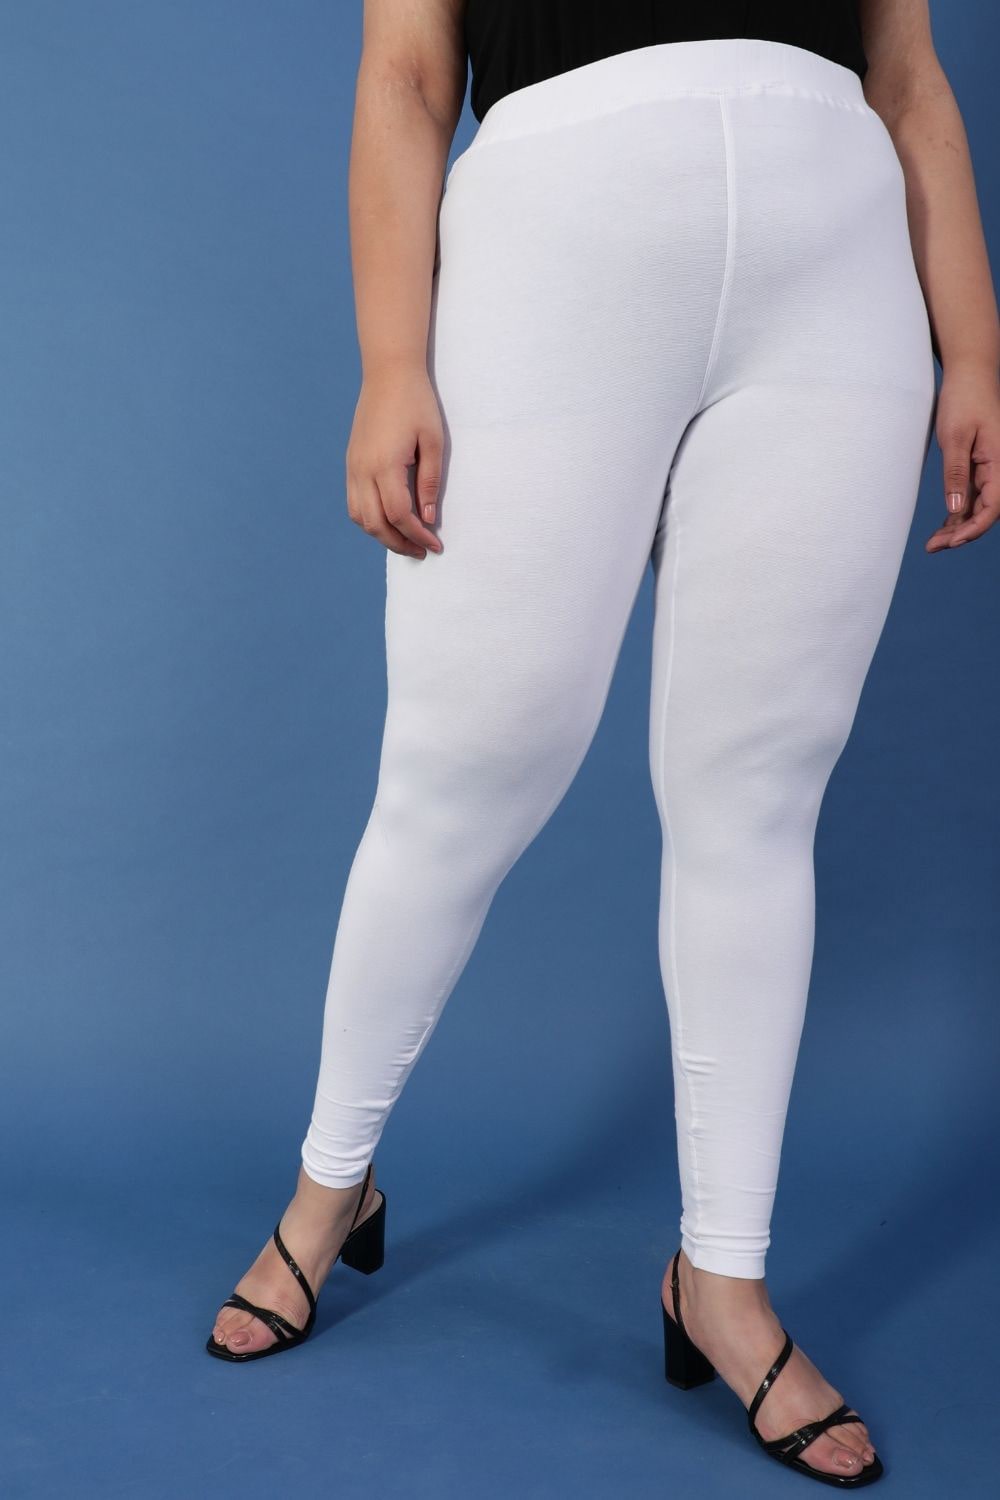 Push Up Leggings Womens Clothing Anti Cellulite Legging Fitness Black  Leggins Sexy High Waist Legins Workout Plus Size Jeggings From Meicloth,  $41.64